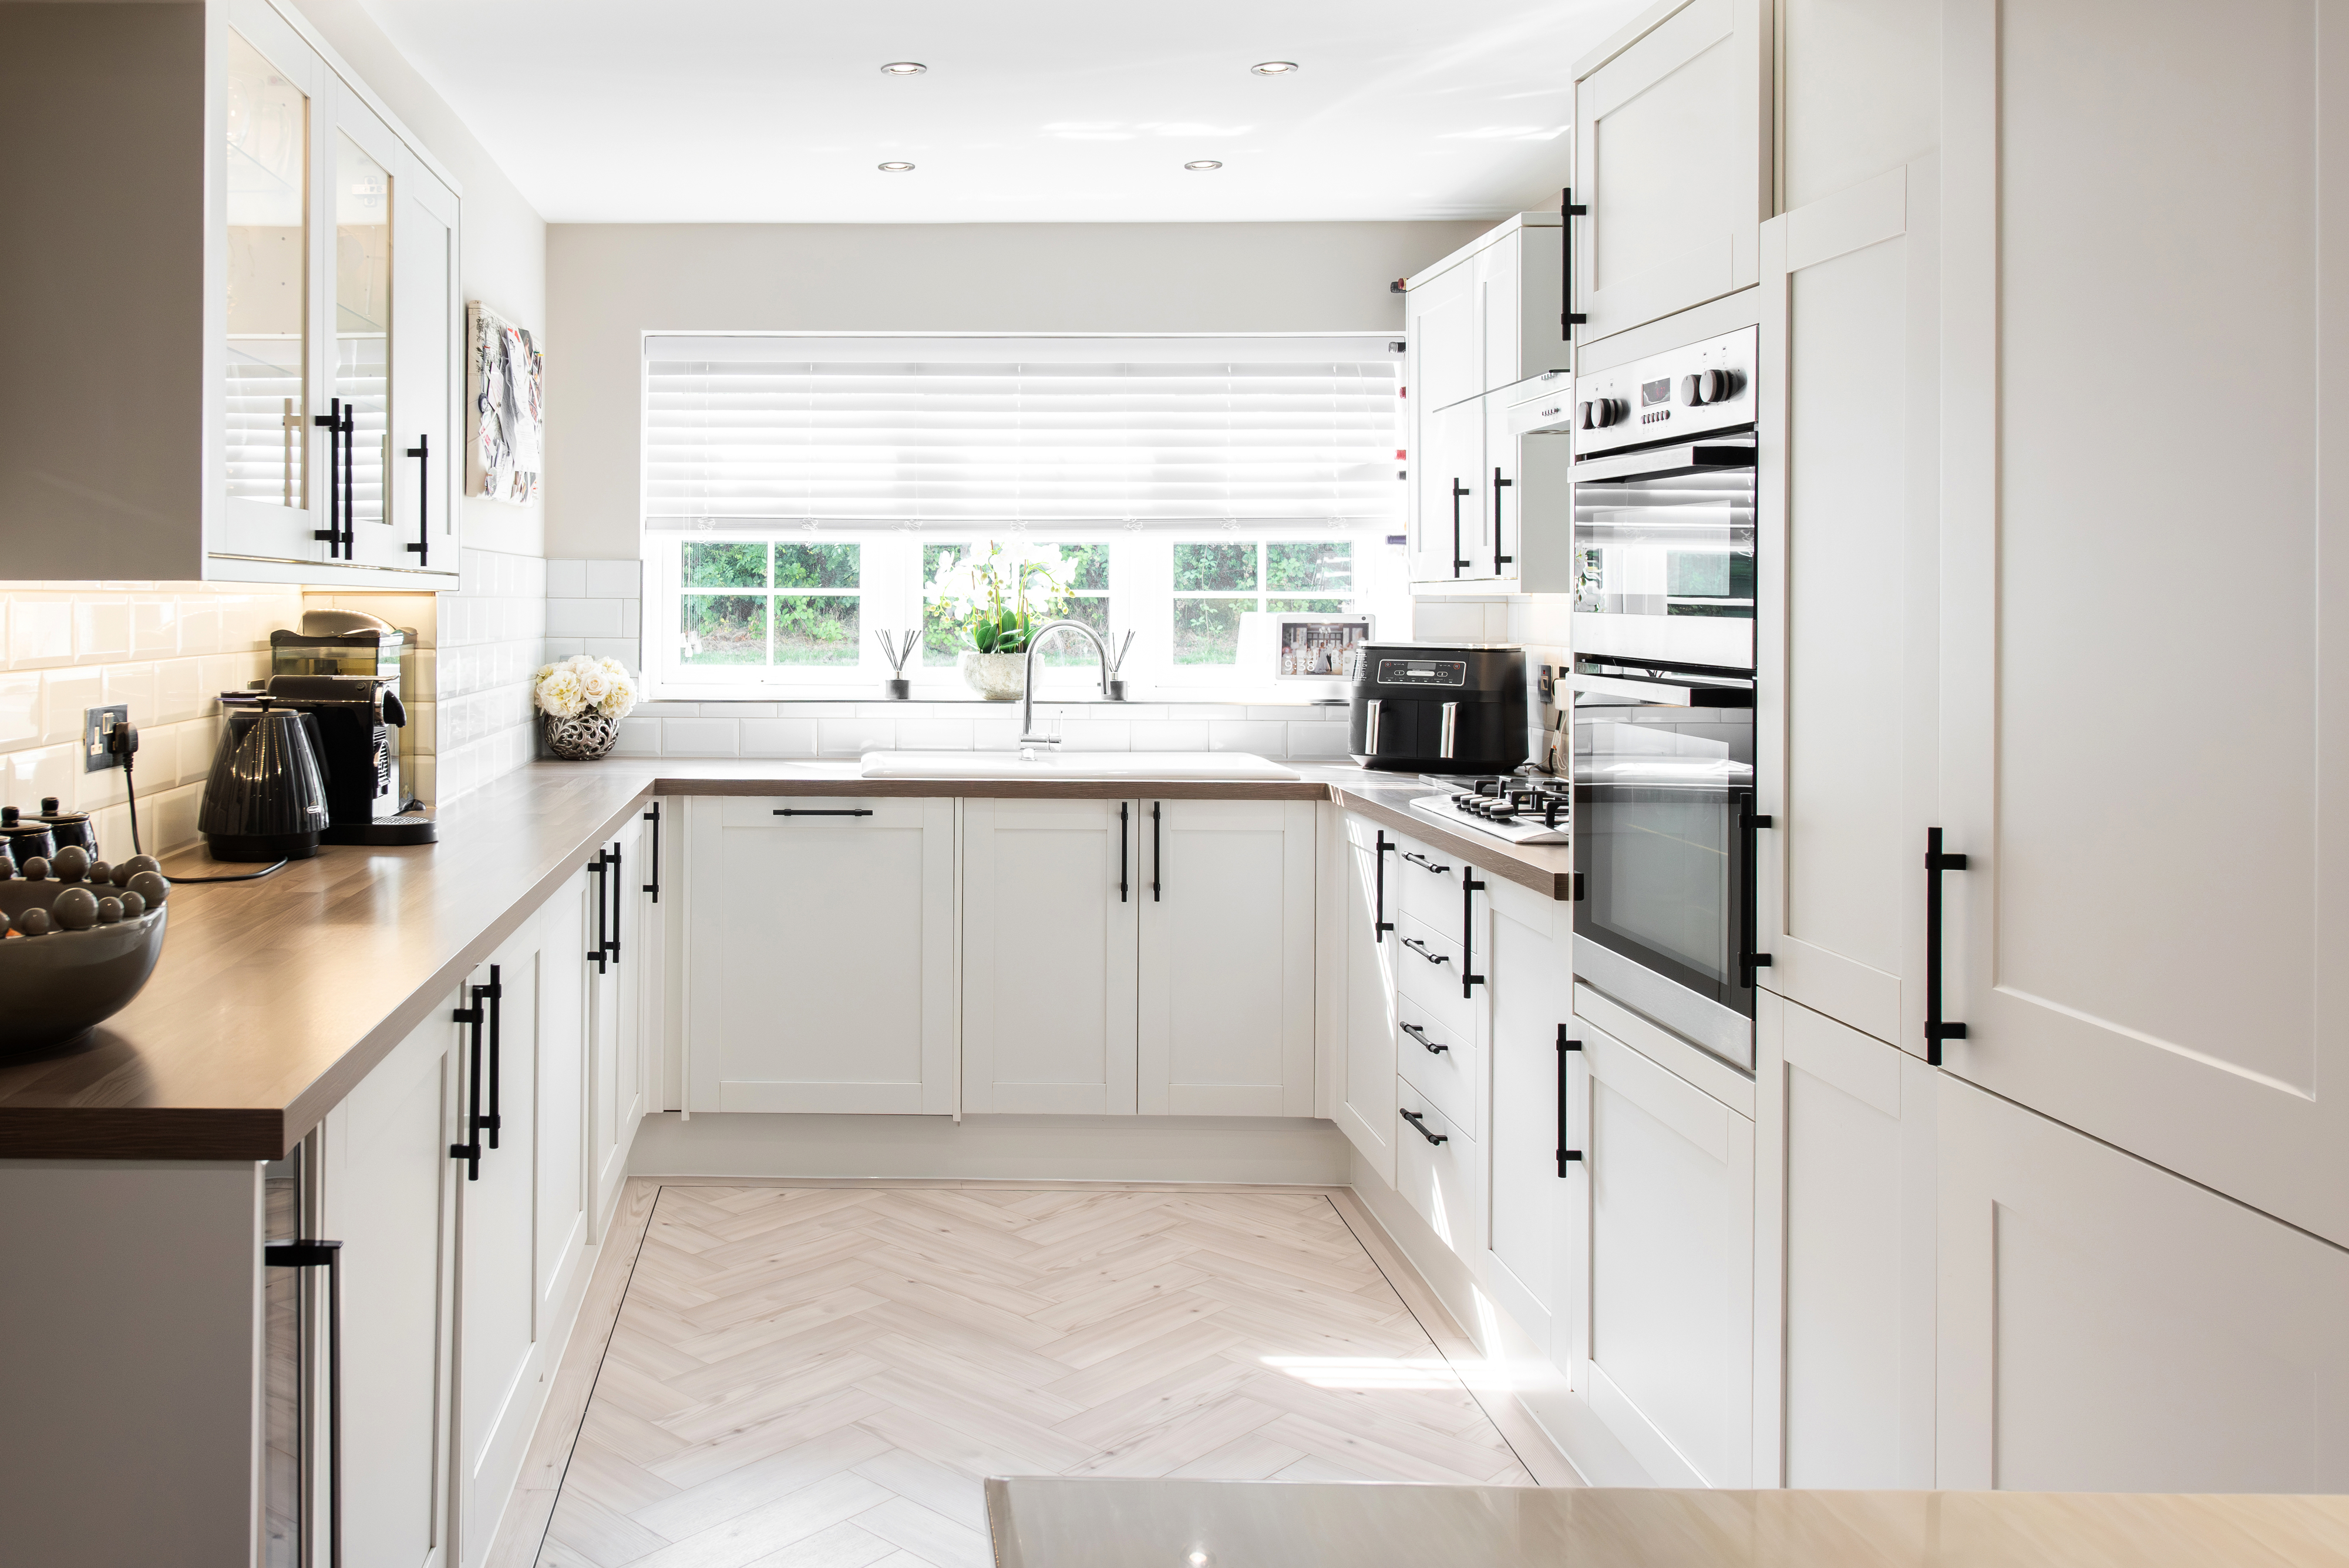 Modern kitchen with white cabinetry, appliances, and a herringbone floor pattern